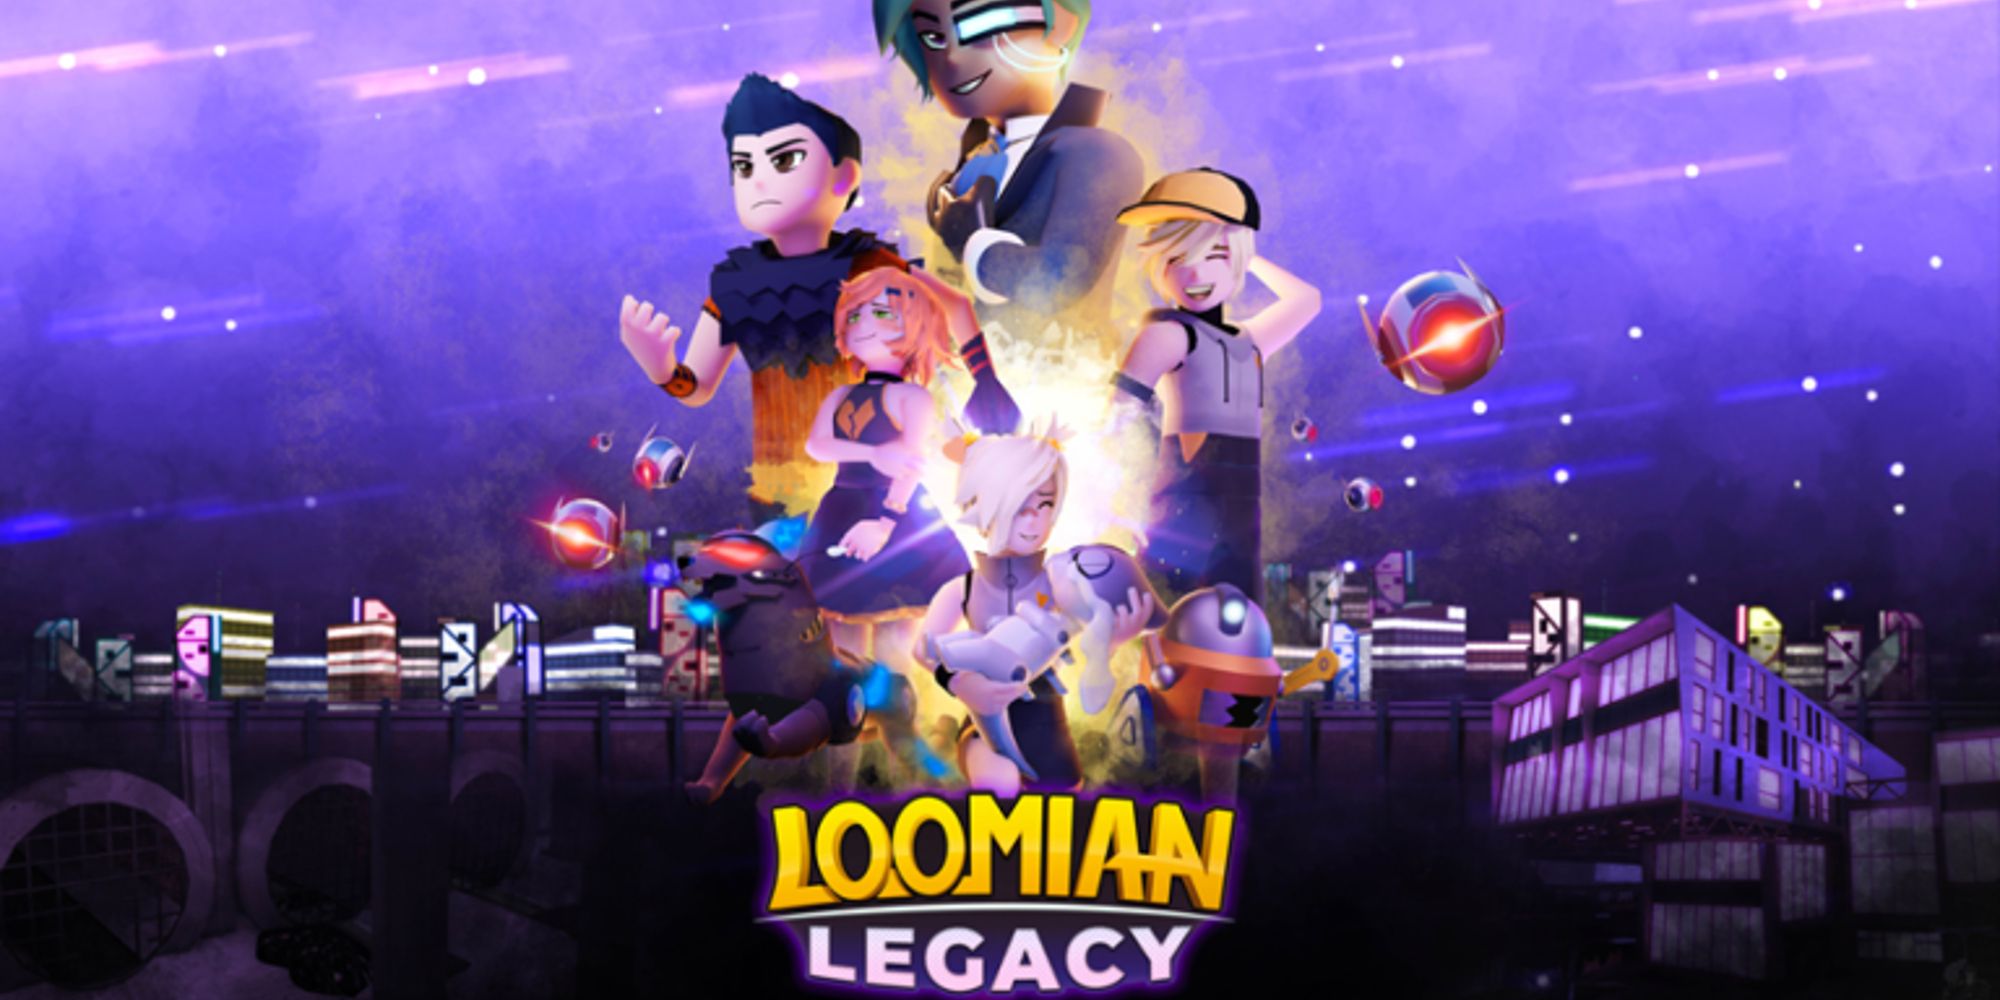 roblox loomian legacy promotional art showing multiple characters